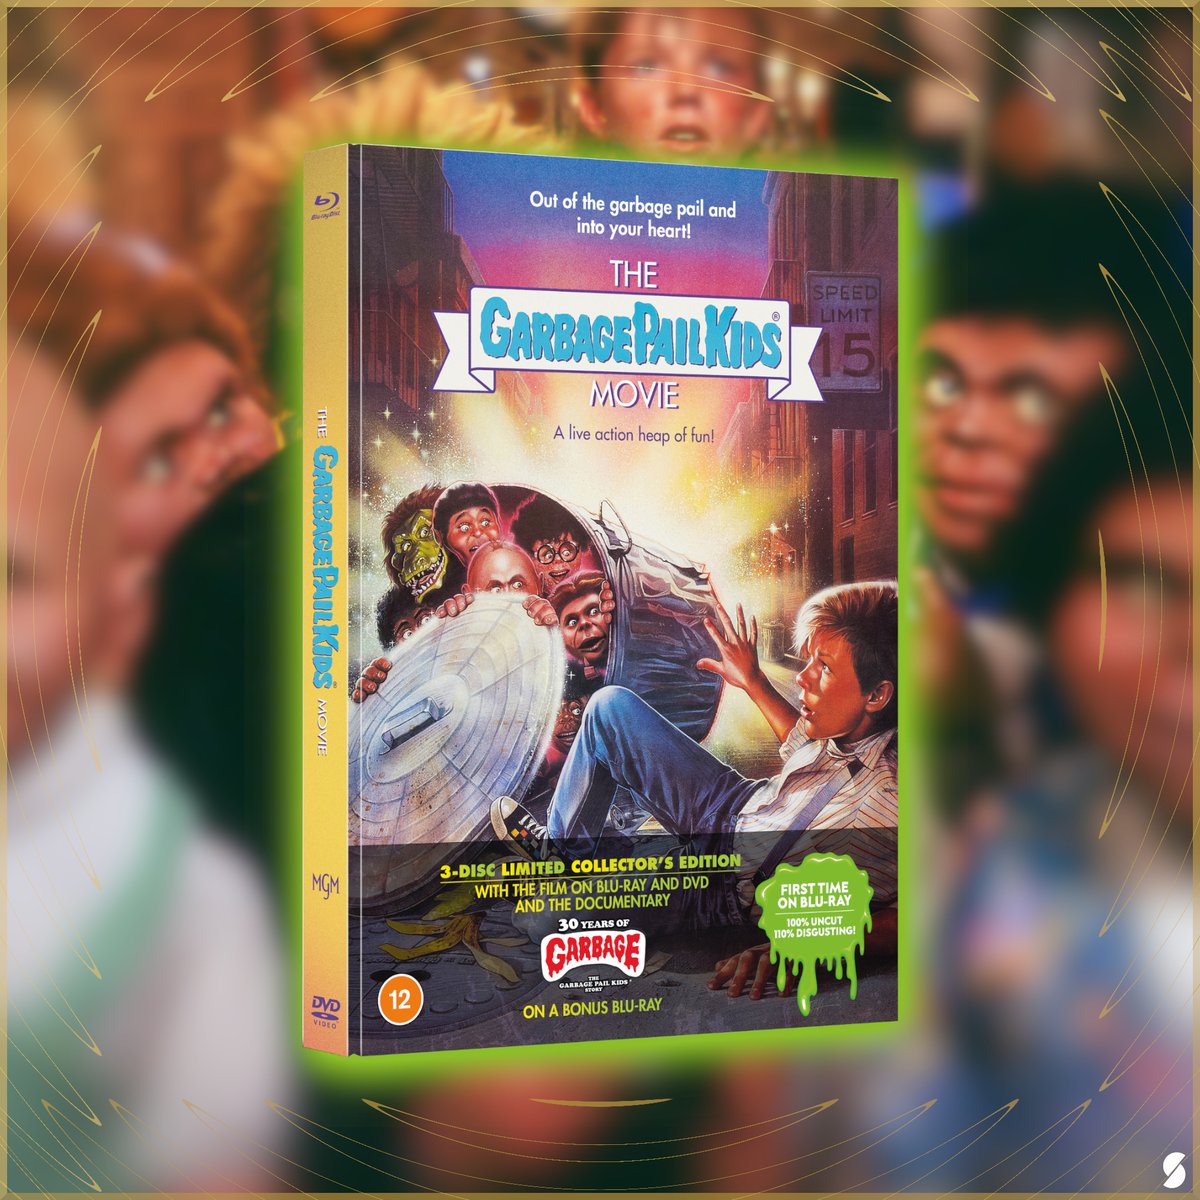 For a huge dose of 1980s nostalgia, you can now get The Garbage Pail Kids Movie on a 3-Disc Limited Collector's Edition Mediabook 

Including the film on Blu-ray, DVD, a bonus Blu-ray & a 24-page booklet

amzn.eu/d/cX3FroR

#1980s #garbagepailkids #physicalmedia